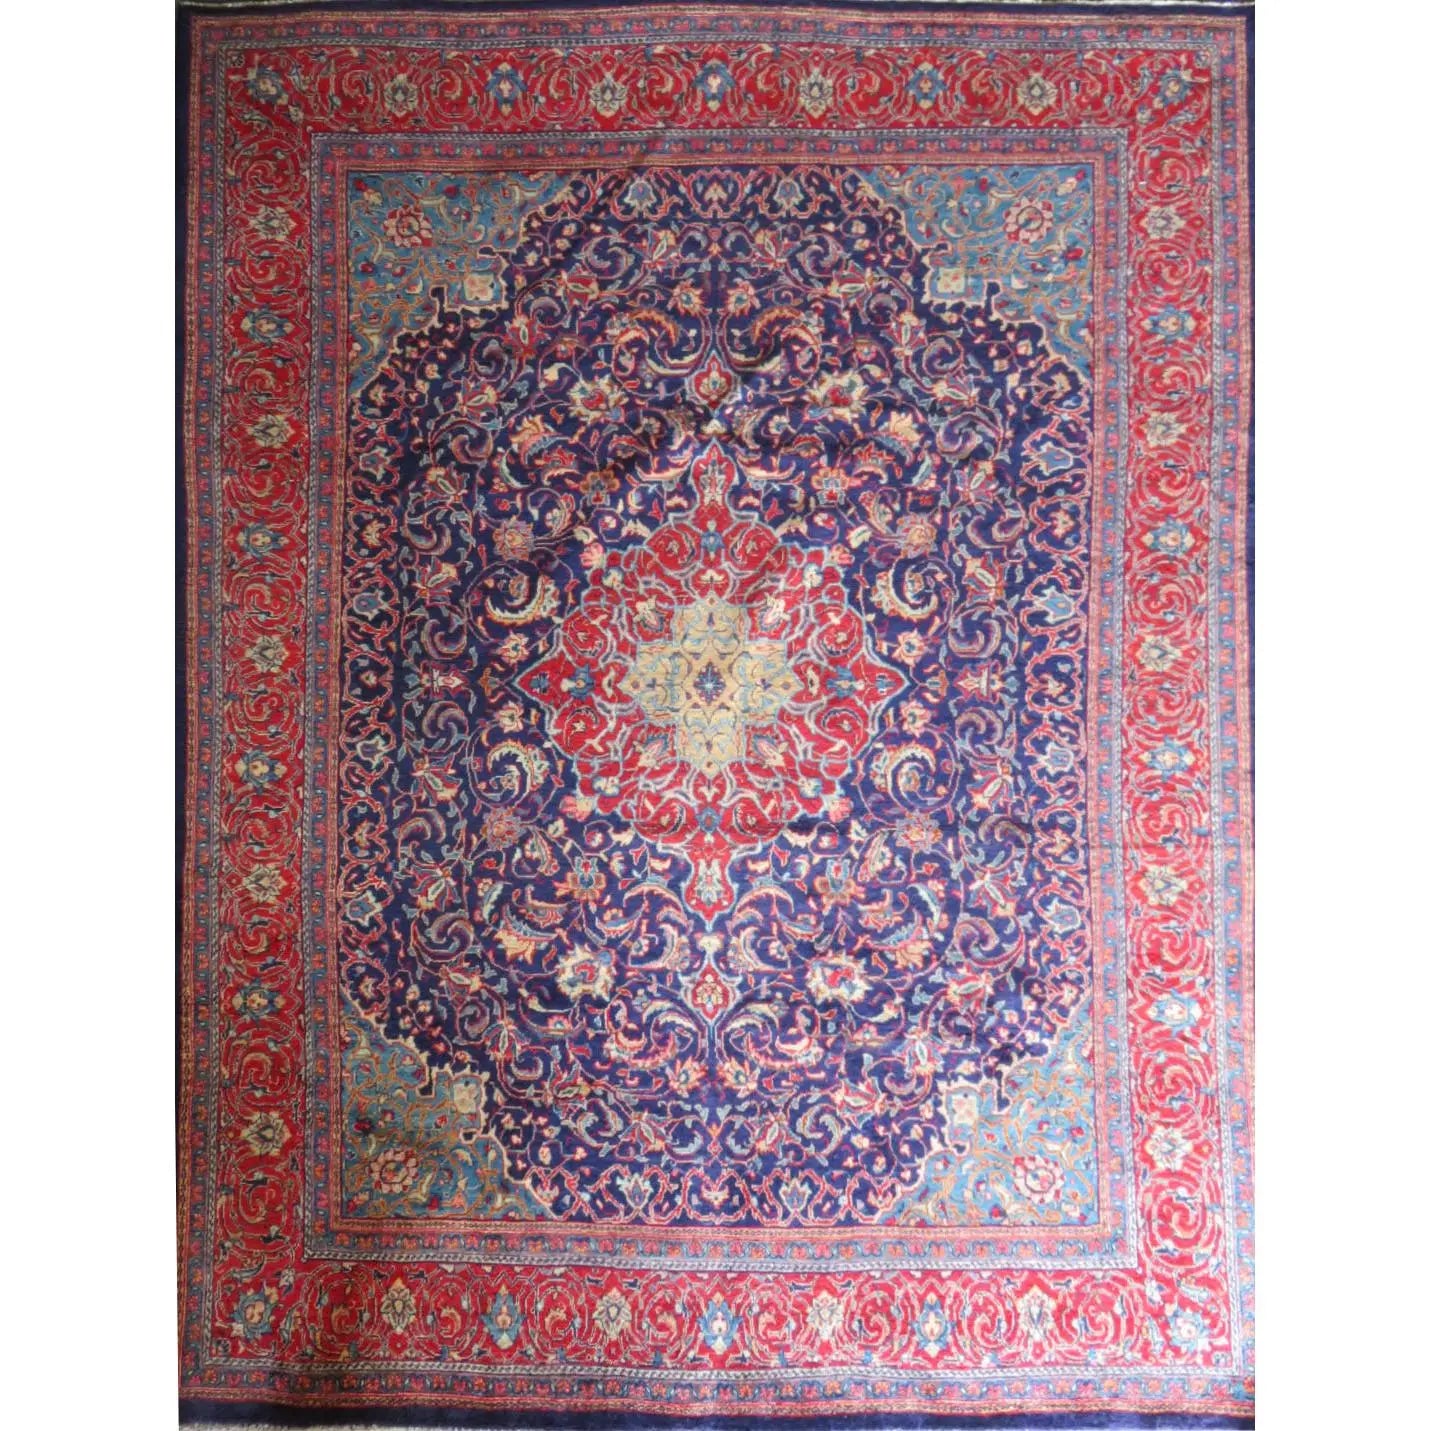 Hand-Knotted Persian Wool Rug – Luxurious Vintage Design, 12'10" x 9'8", Artisan Crafted